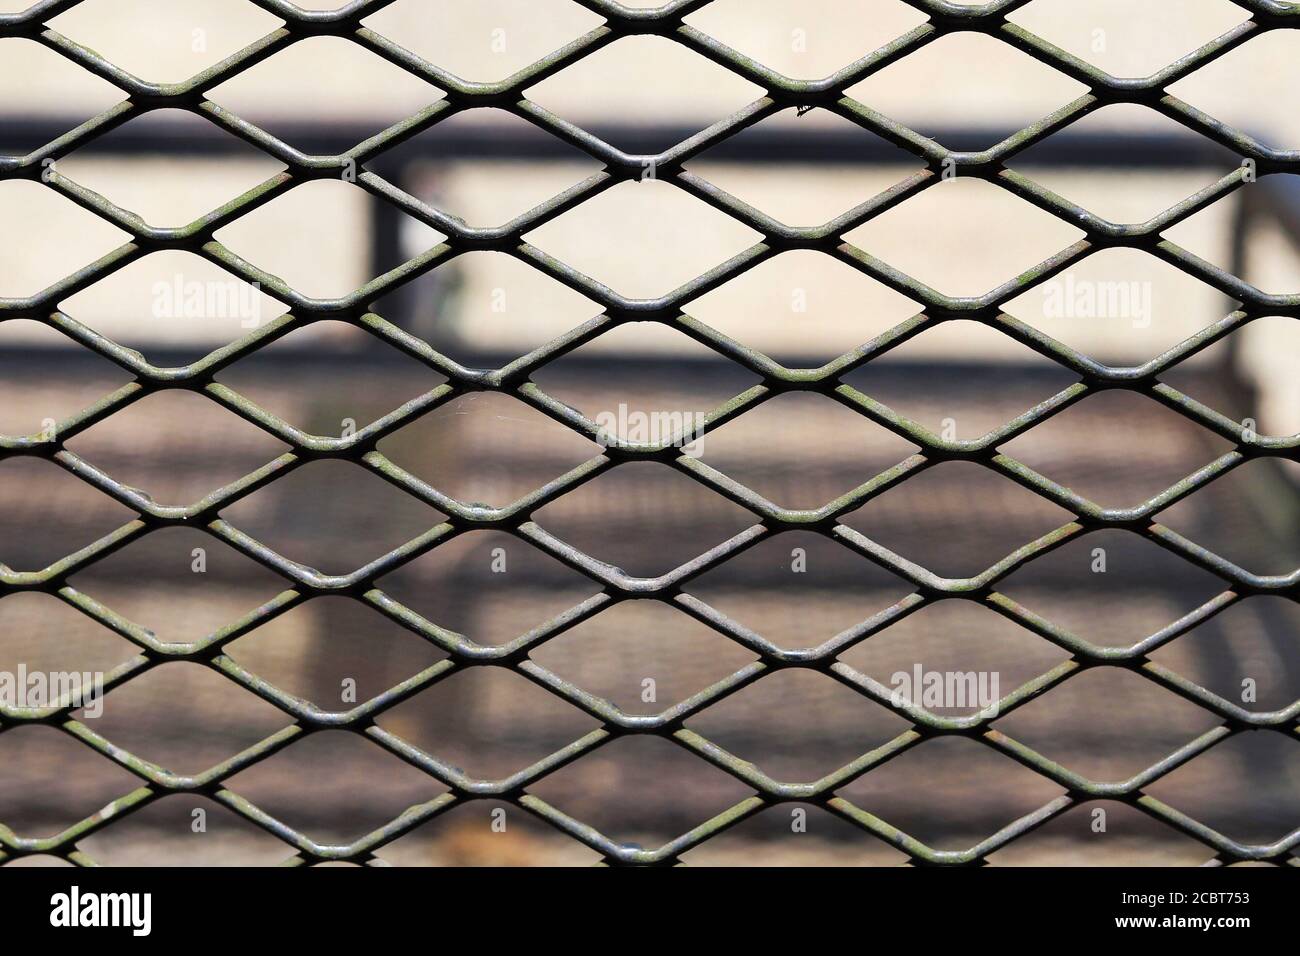 A close up image of a metal fence Stock Photo